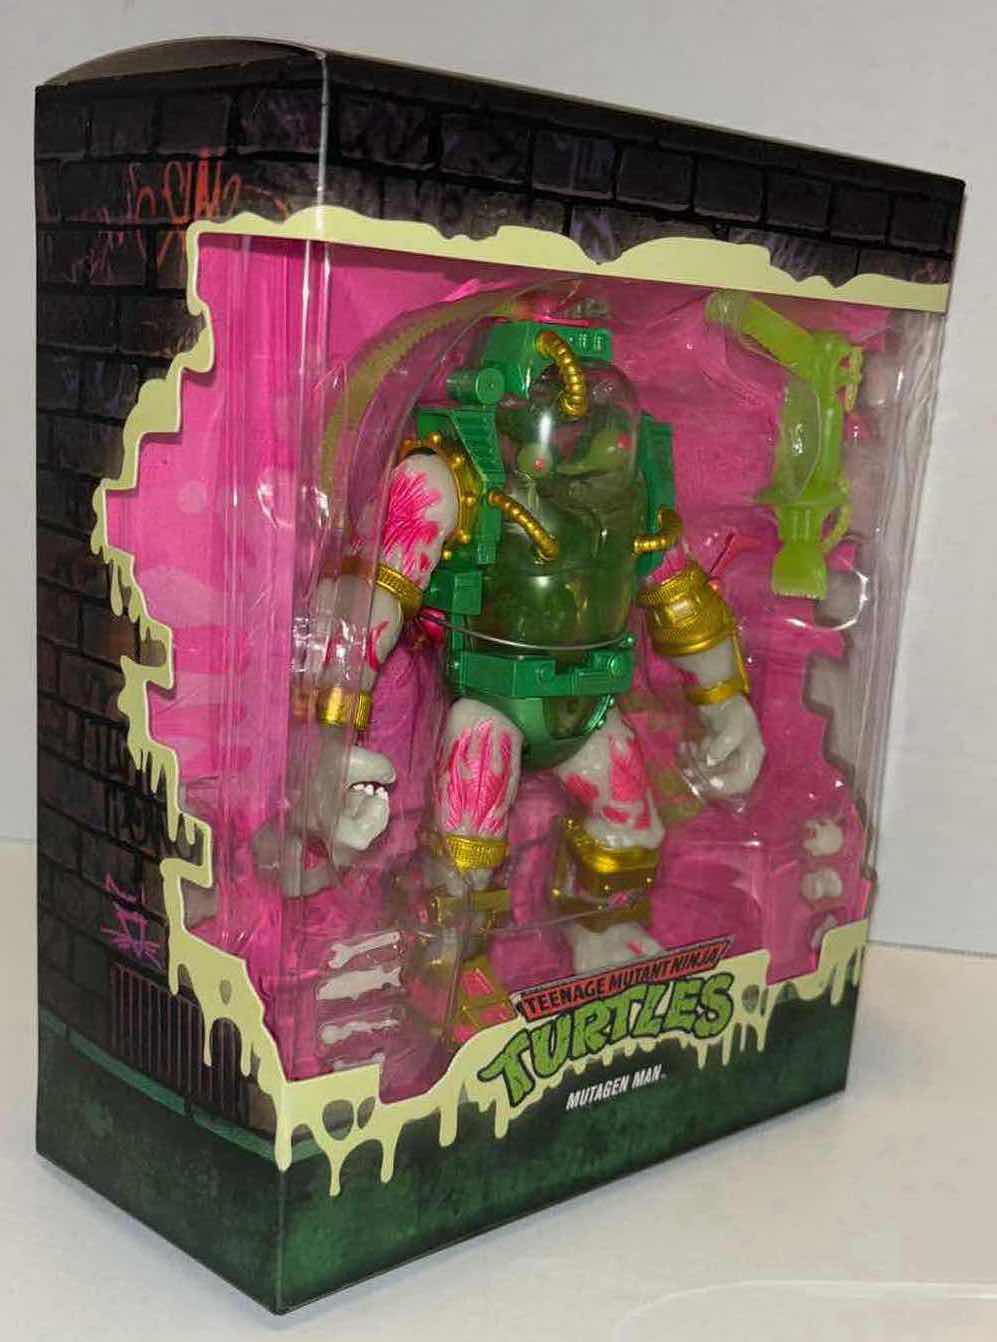 Photo 1 of NEW SUPER 7 TEENAGE MUTANT NINJA TURTLES ULTIMATE ACTION FIGURE & ACCESSORIES, ENTERTAINMENT EARTH EXCLUSIVE LIMITED EDITION GLOW IN THE DARK “MUTAGEN MAN”